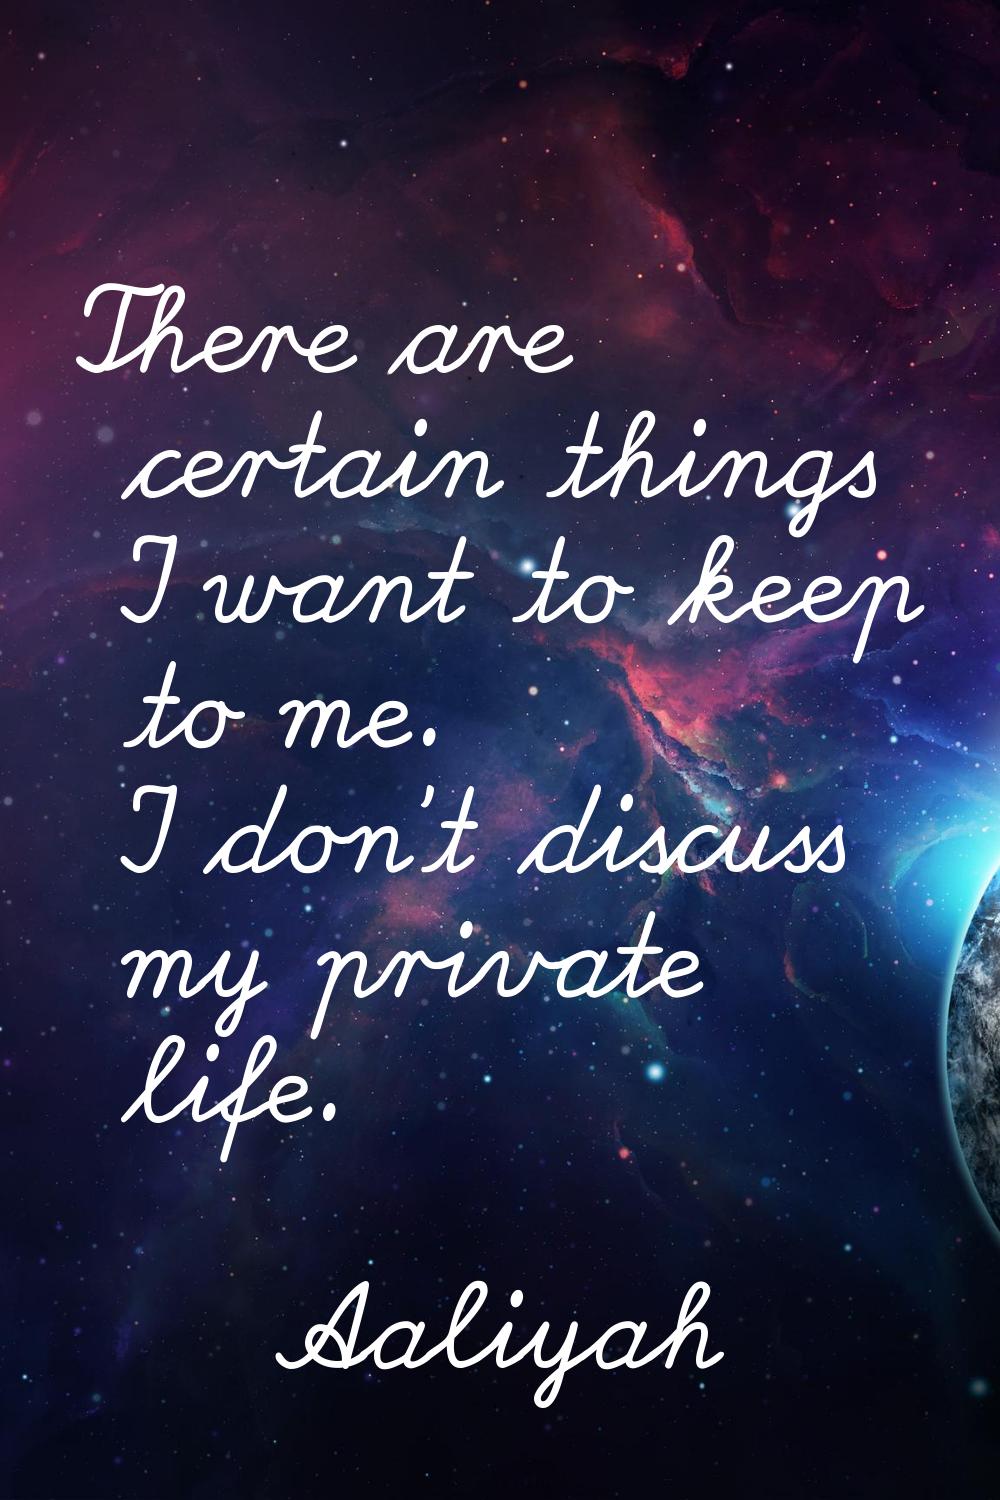 There are certain things I want to keep to me. I don't discuss my private life.